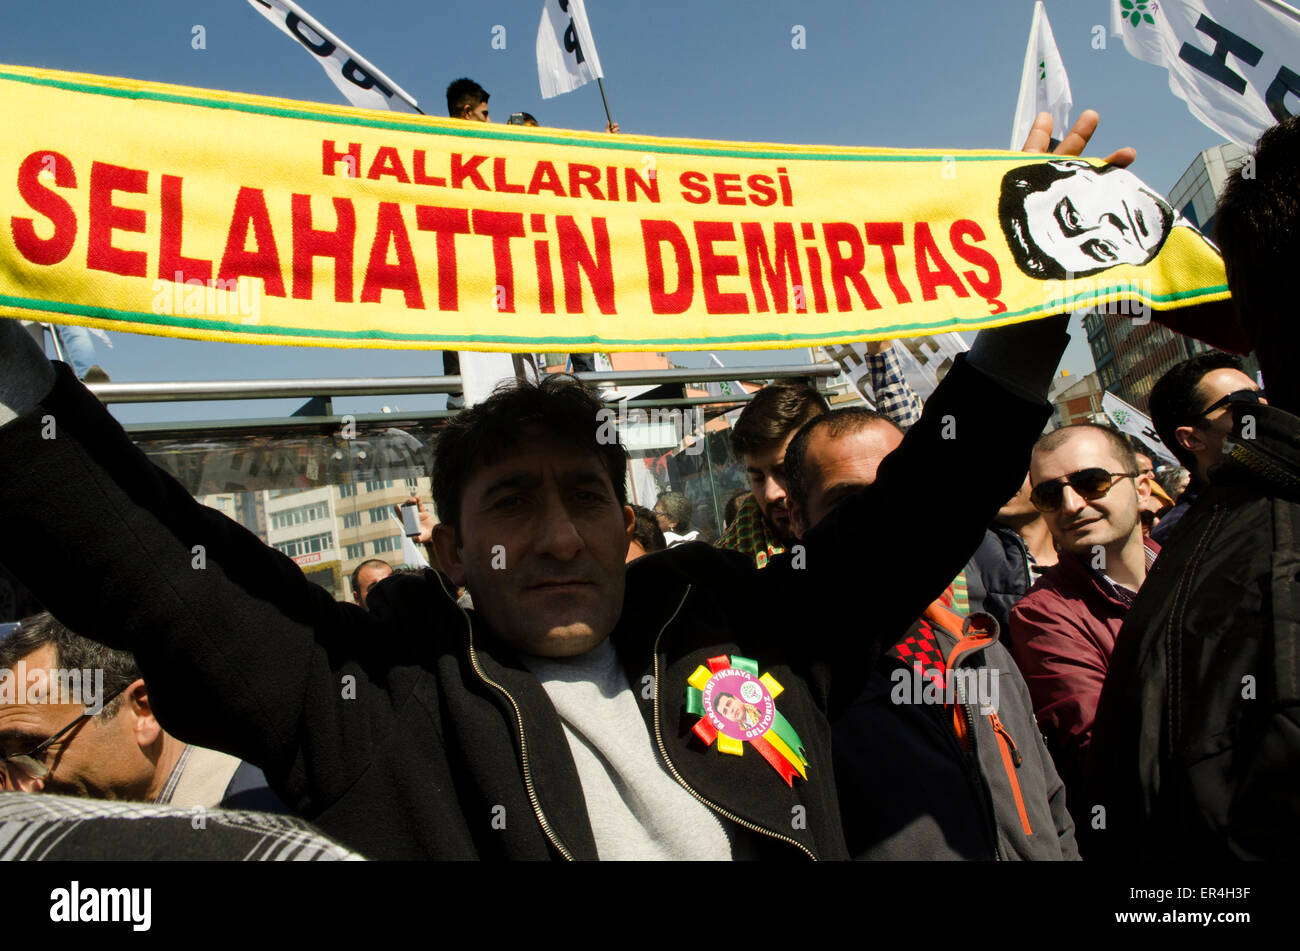 Support for Selahattin Demirtaş leader of HDP (Peoples' Democratic Party) at Turkish election rally Istanbul Stock Photo